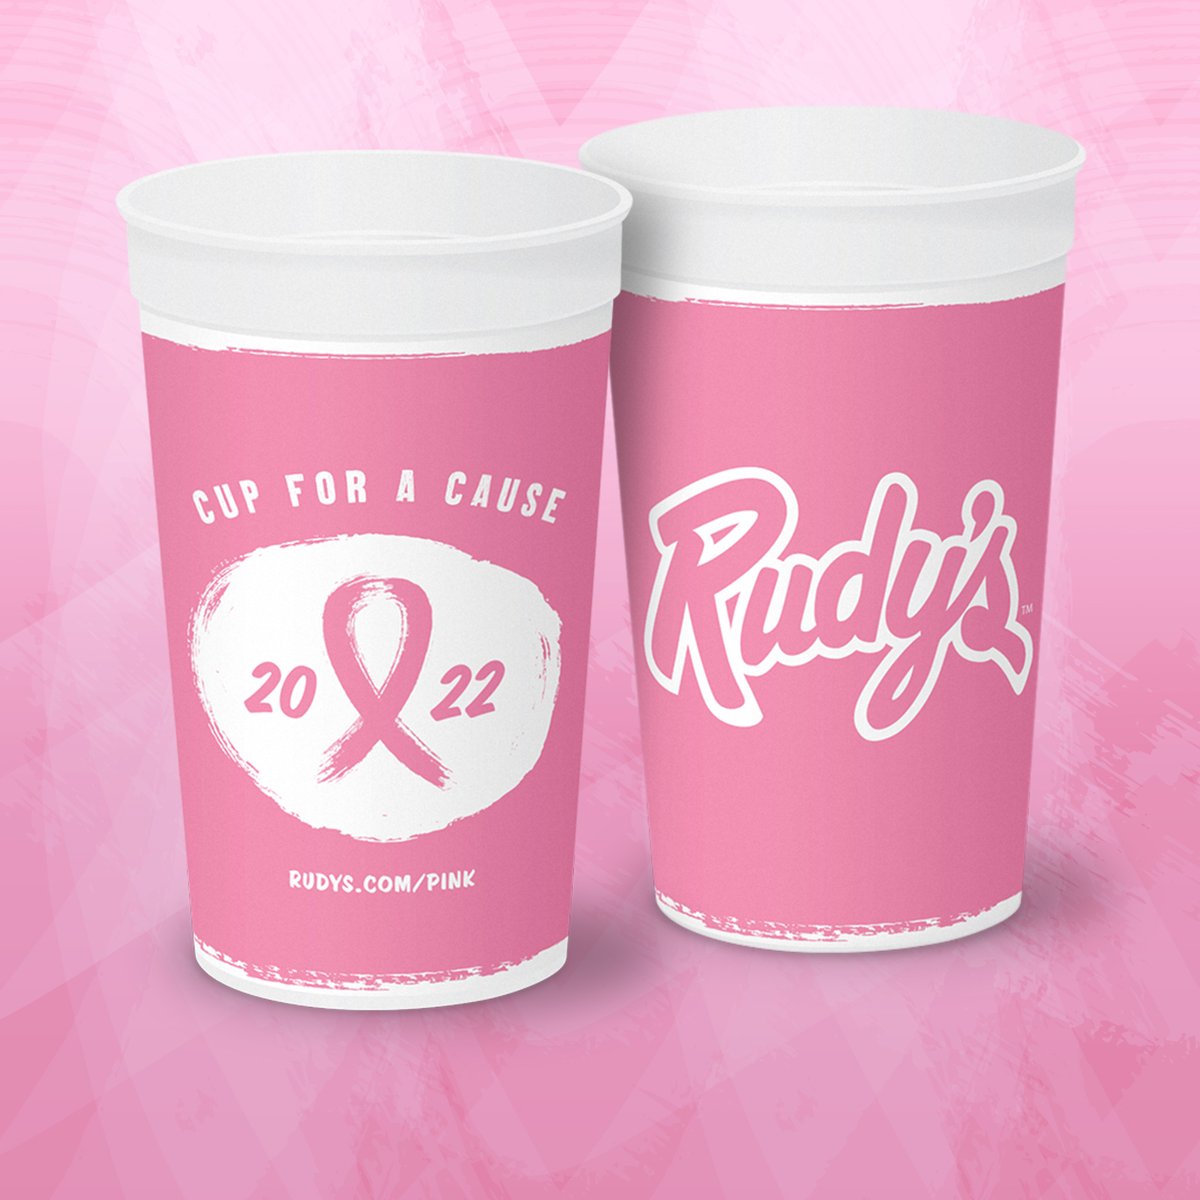 This is the last week you can take advantage of #rudysbbq #cupforacause You can support breast cancer research and treatment by grabbing a pink 32-ounce cup at participating Rudy's, donate $1 to UNMCCC and get a coupon for a free drink on your next visit.